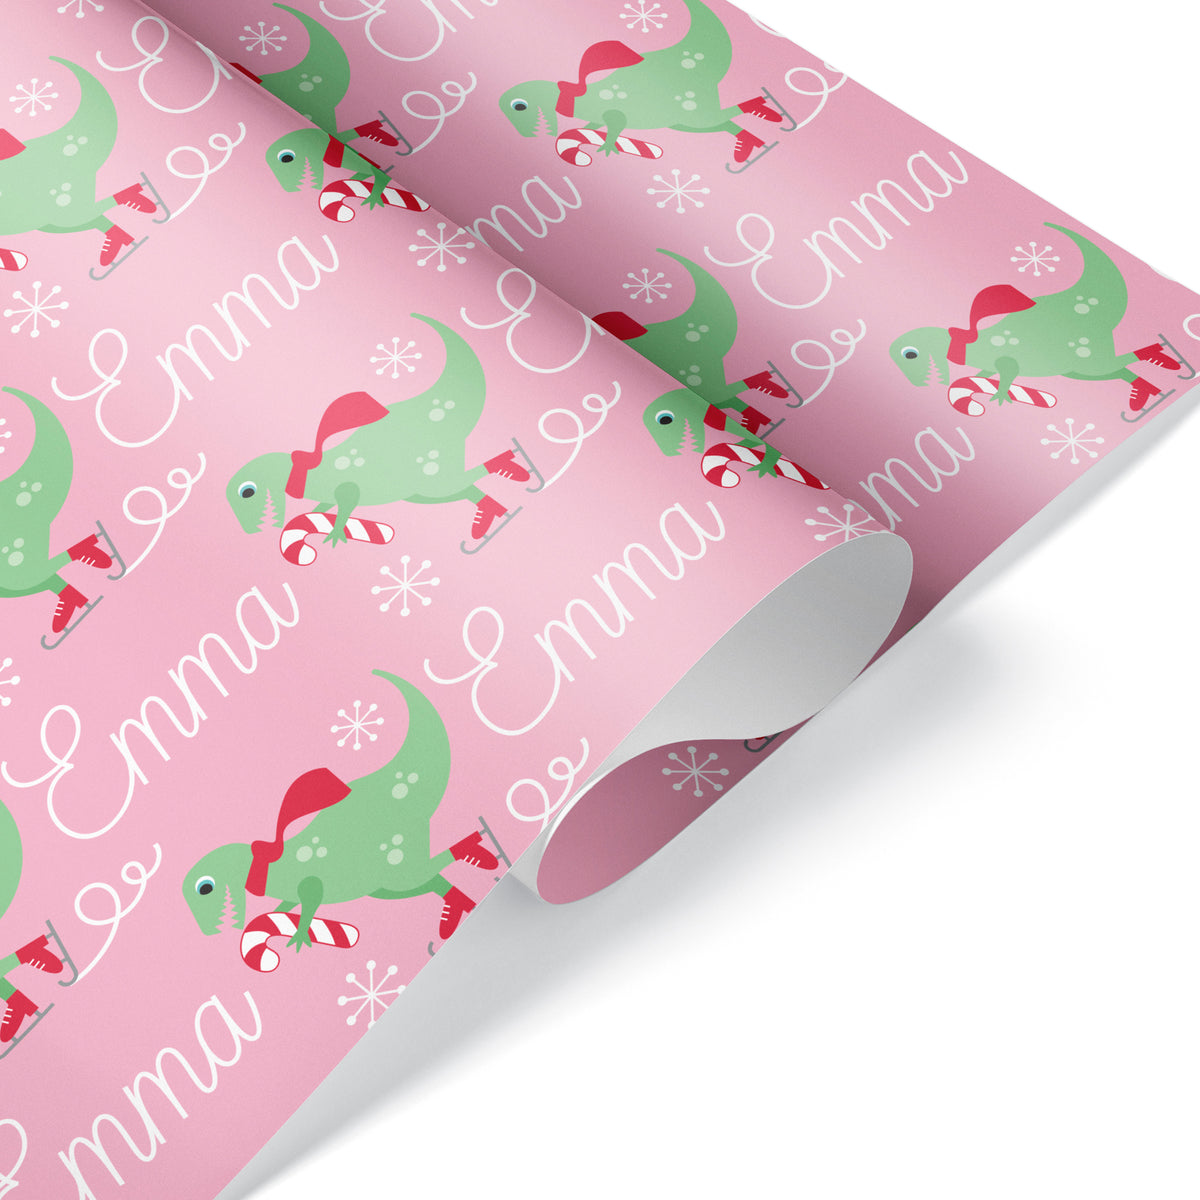 T-Rex Ice Skating Christmas Personalized Wrapping Paper - PINK